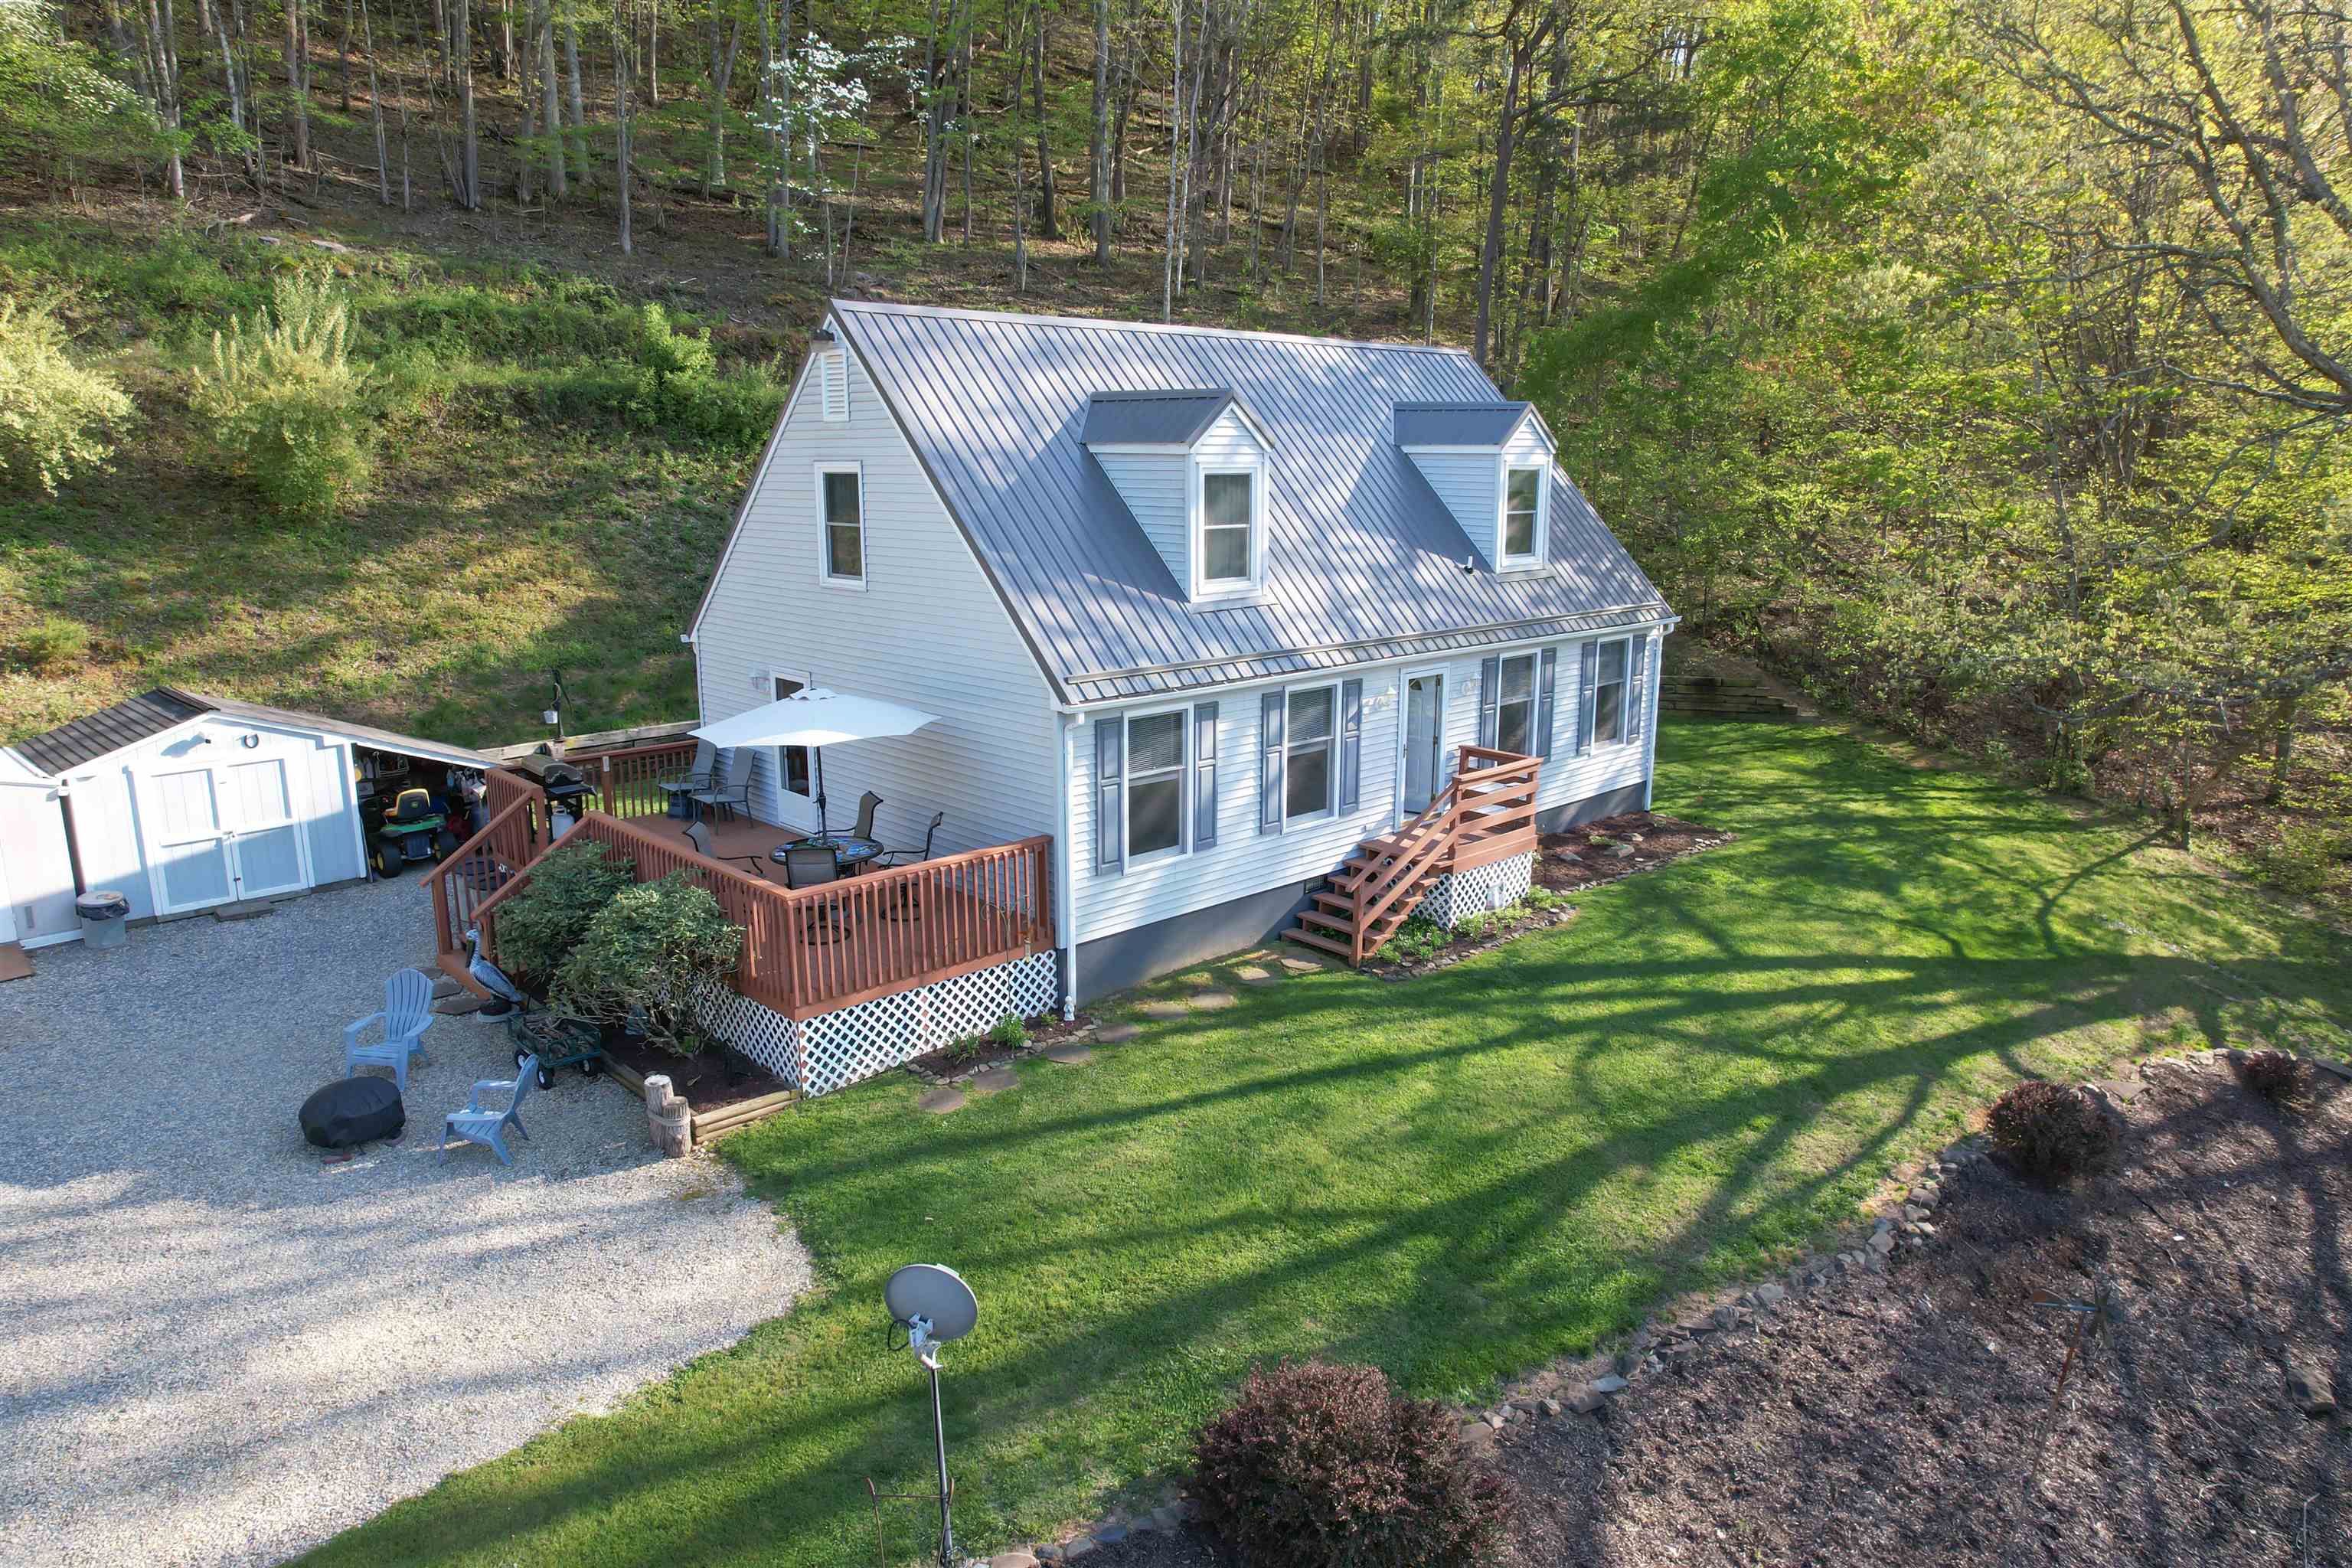 Open House Sunday 12:00-2:00: Escape to rural bliss at 7580 Booker Branch Rd. in Radford, VA. This charming 4-bed, 2-bath farmhouse sits on 1.5 acres of serene countryside, offering both tranquility and convenience. With a new metal roof, new heat pump, new insulated tilted windows upstairs, updated kitchen appliances, and a flexible layout, this home is as practical as it is picturesque. Enjoy entertaining on the spacious back deck or relaxing in the peaceful surroundings. Featuring a potential master suite upstairs with a jetted tub, and a master bedroom on the first floor, this home offers versatility for your lifestyle. A well-built retaining wall ensures proper drainage, and the school bus stops conveniently at the bottom of the driveway.